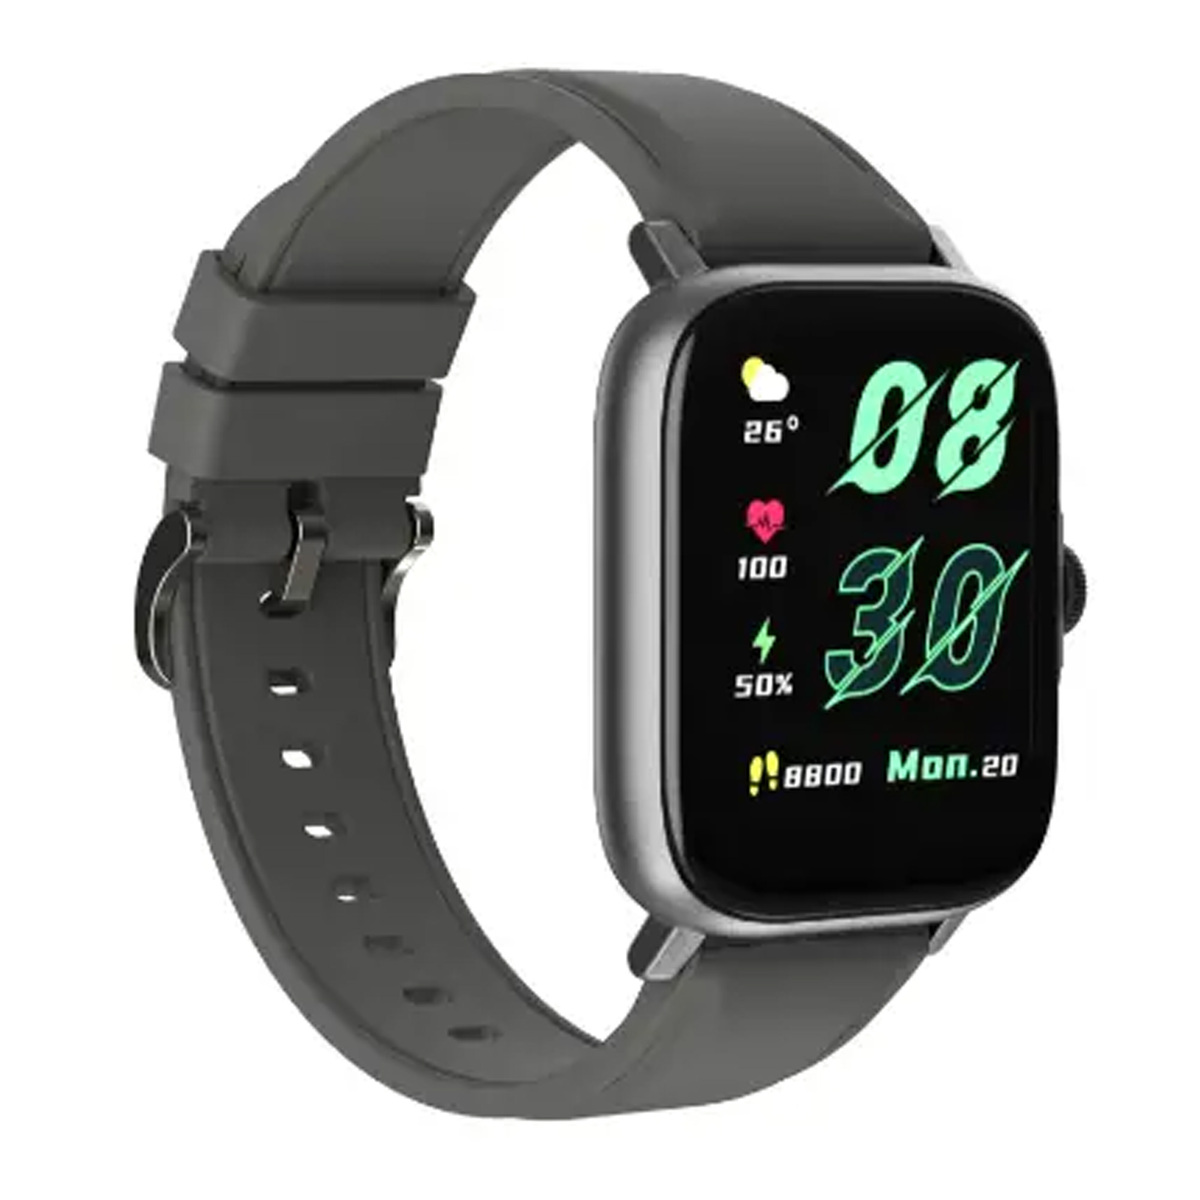 Aukey SmartWatch Fitness Tracker with 10Sport Modes Tracking & Customise WatchFaces with Phone Calls Grey(SW-1P-GR)